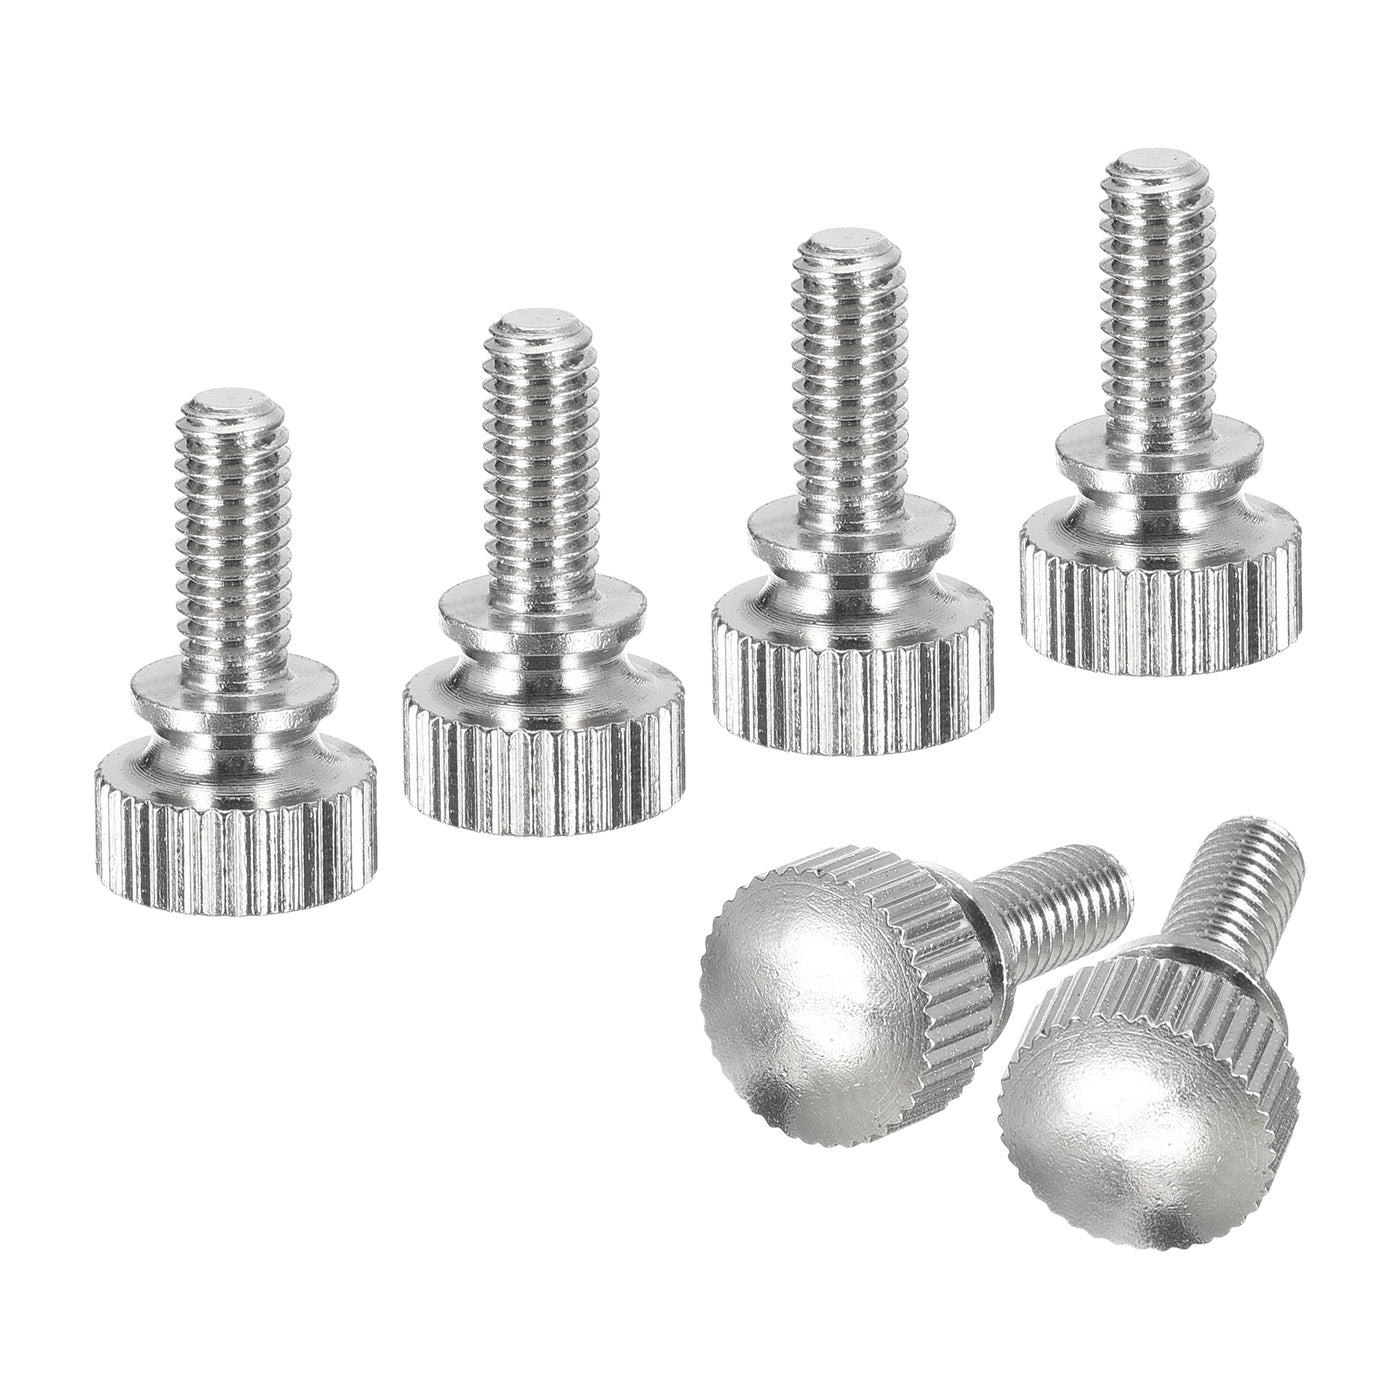 uxcell Uxcell M4x10mm Knurled Thumb Screws, 6pcs Brass Thumb Screws with Shoulder, Silver Tone